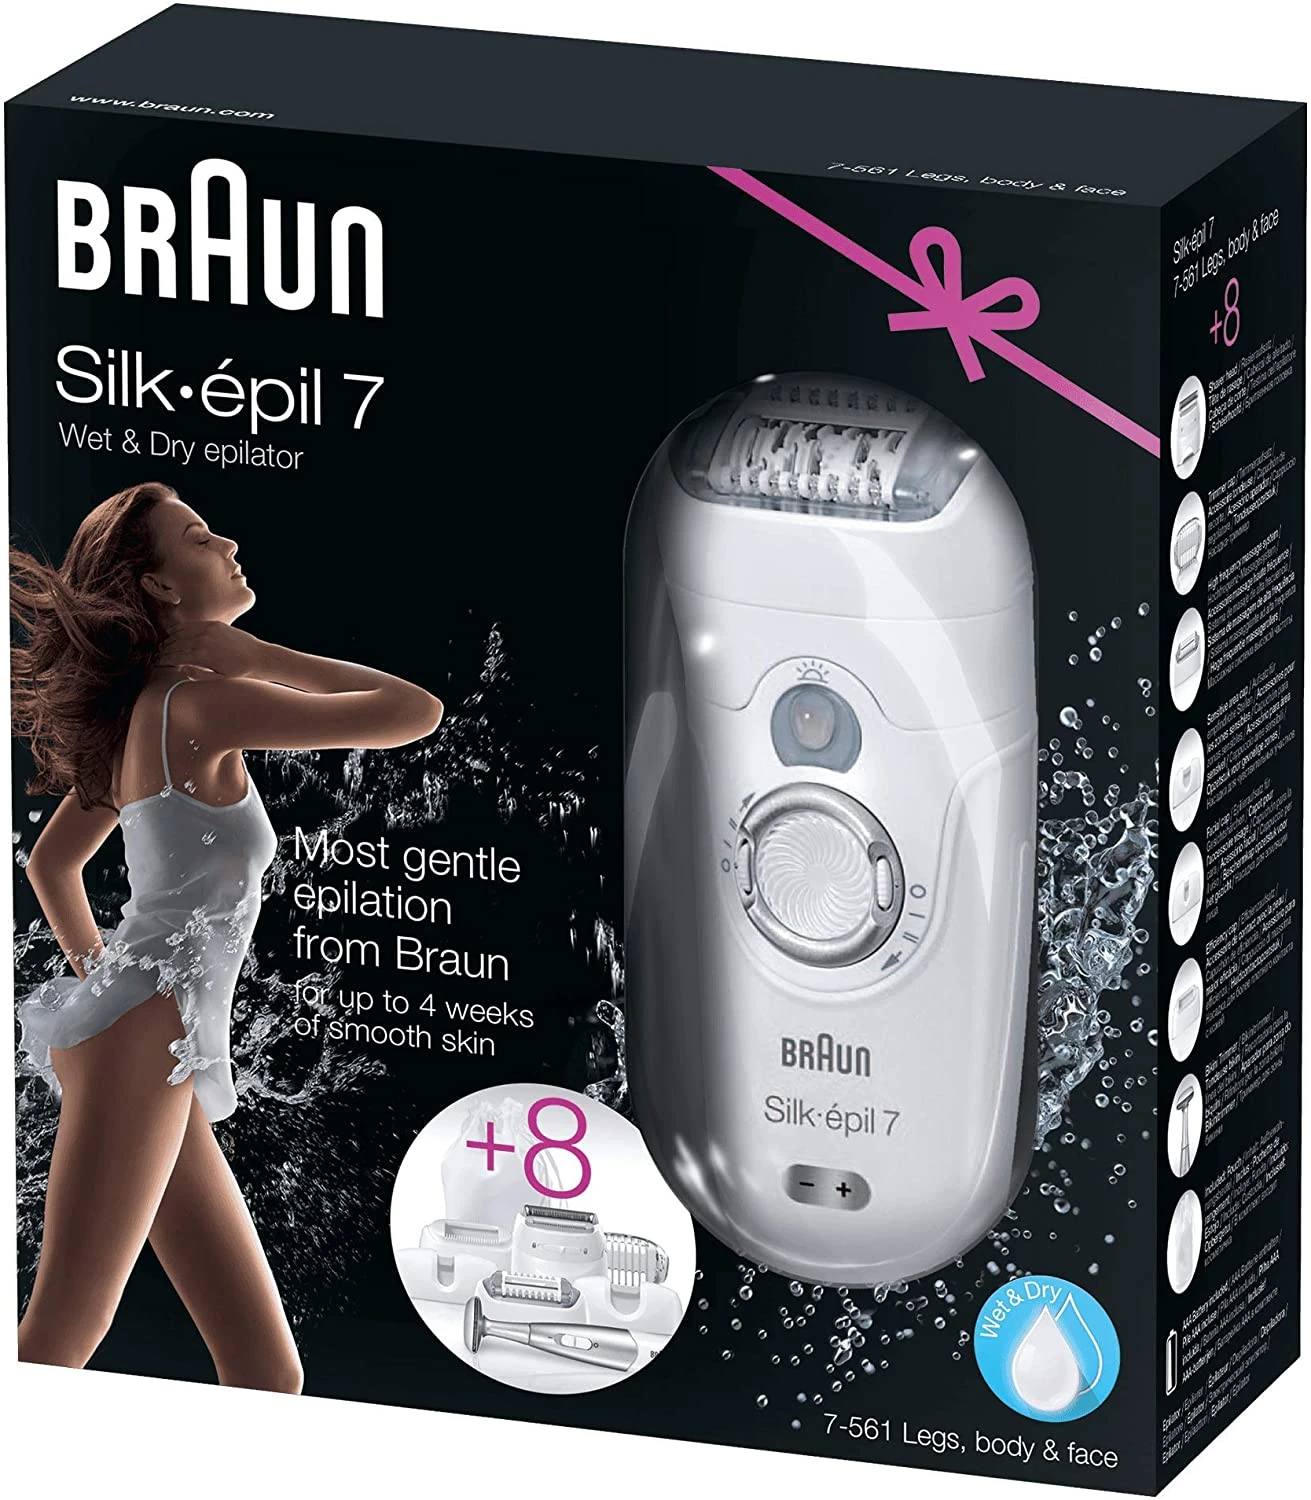 Braun Silk-epil 7 7561 Wet And Dry Epilator For Women Cordless Epilation  And Hair Removal With 8 Extras Including Bikini Trimmer - Epilator -  AliExpress